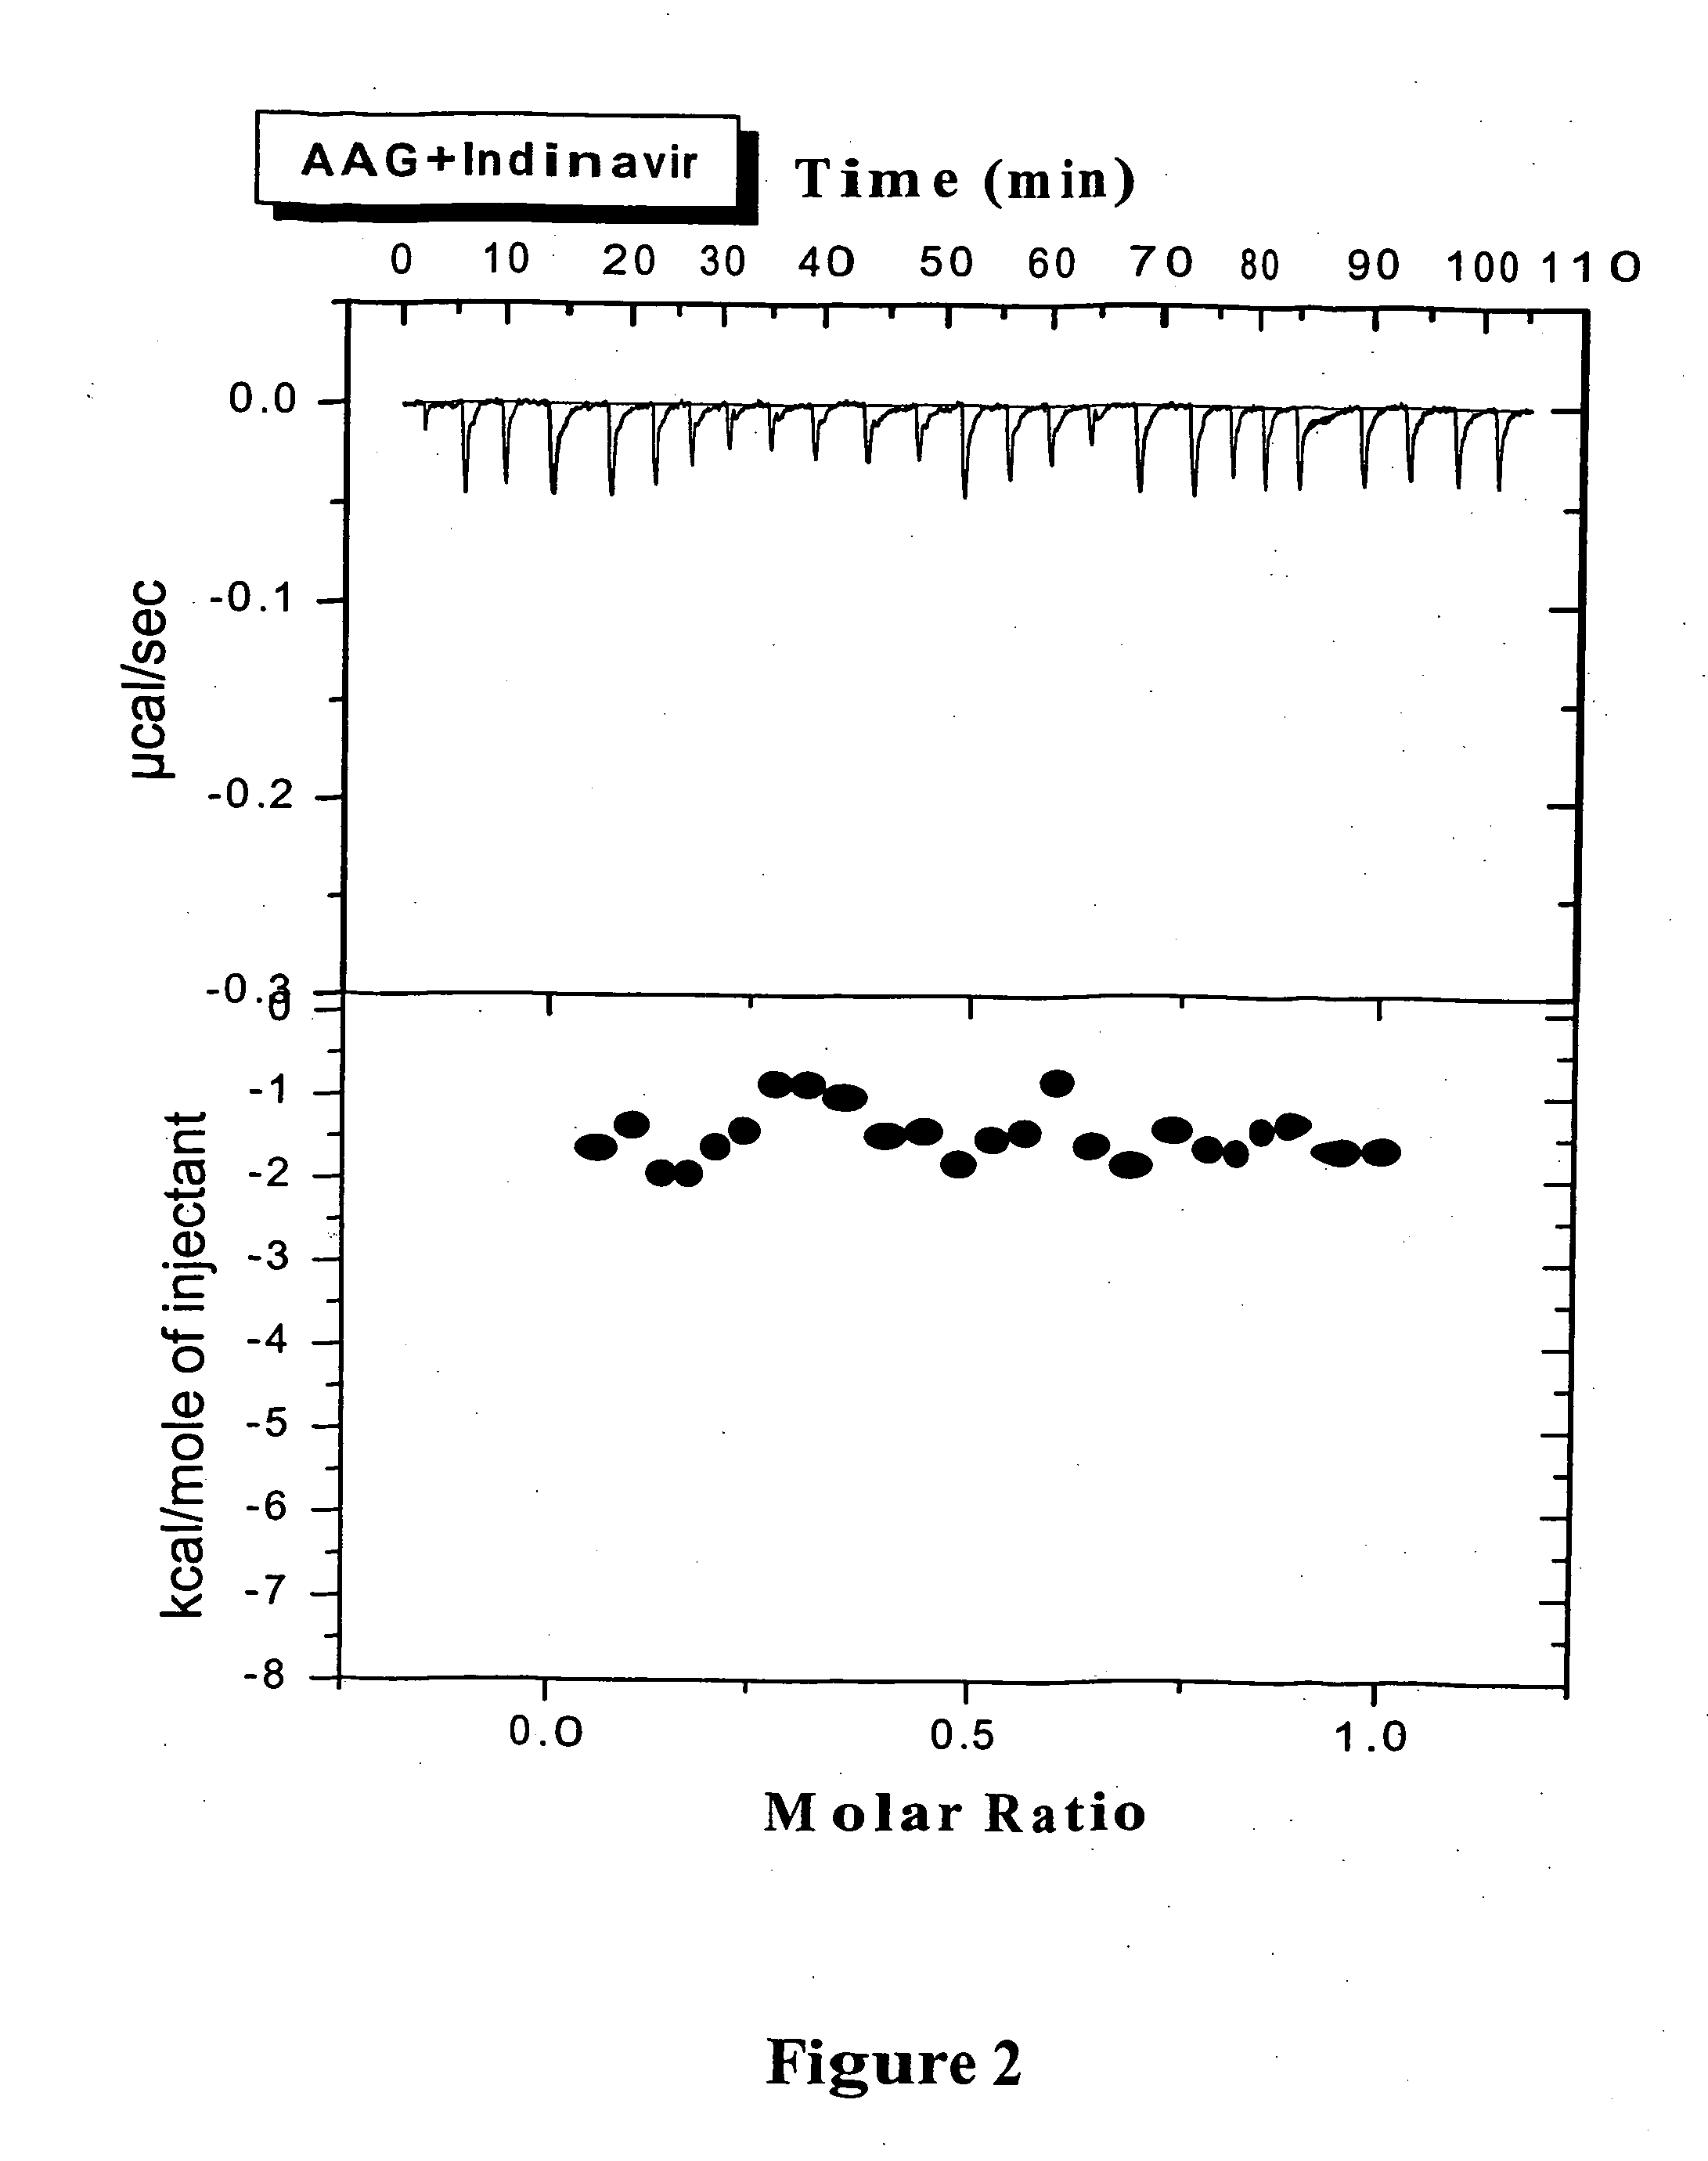 Methods for determining plasma free drug concentration by direct measurement of binding affinity of protease inhibitors to plasma proteins